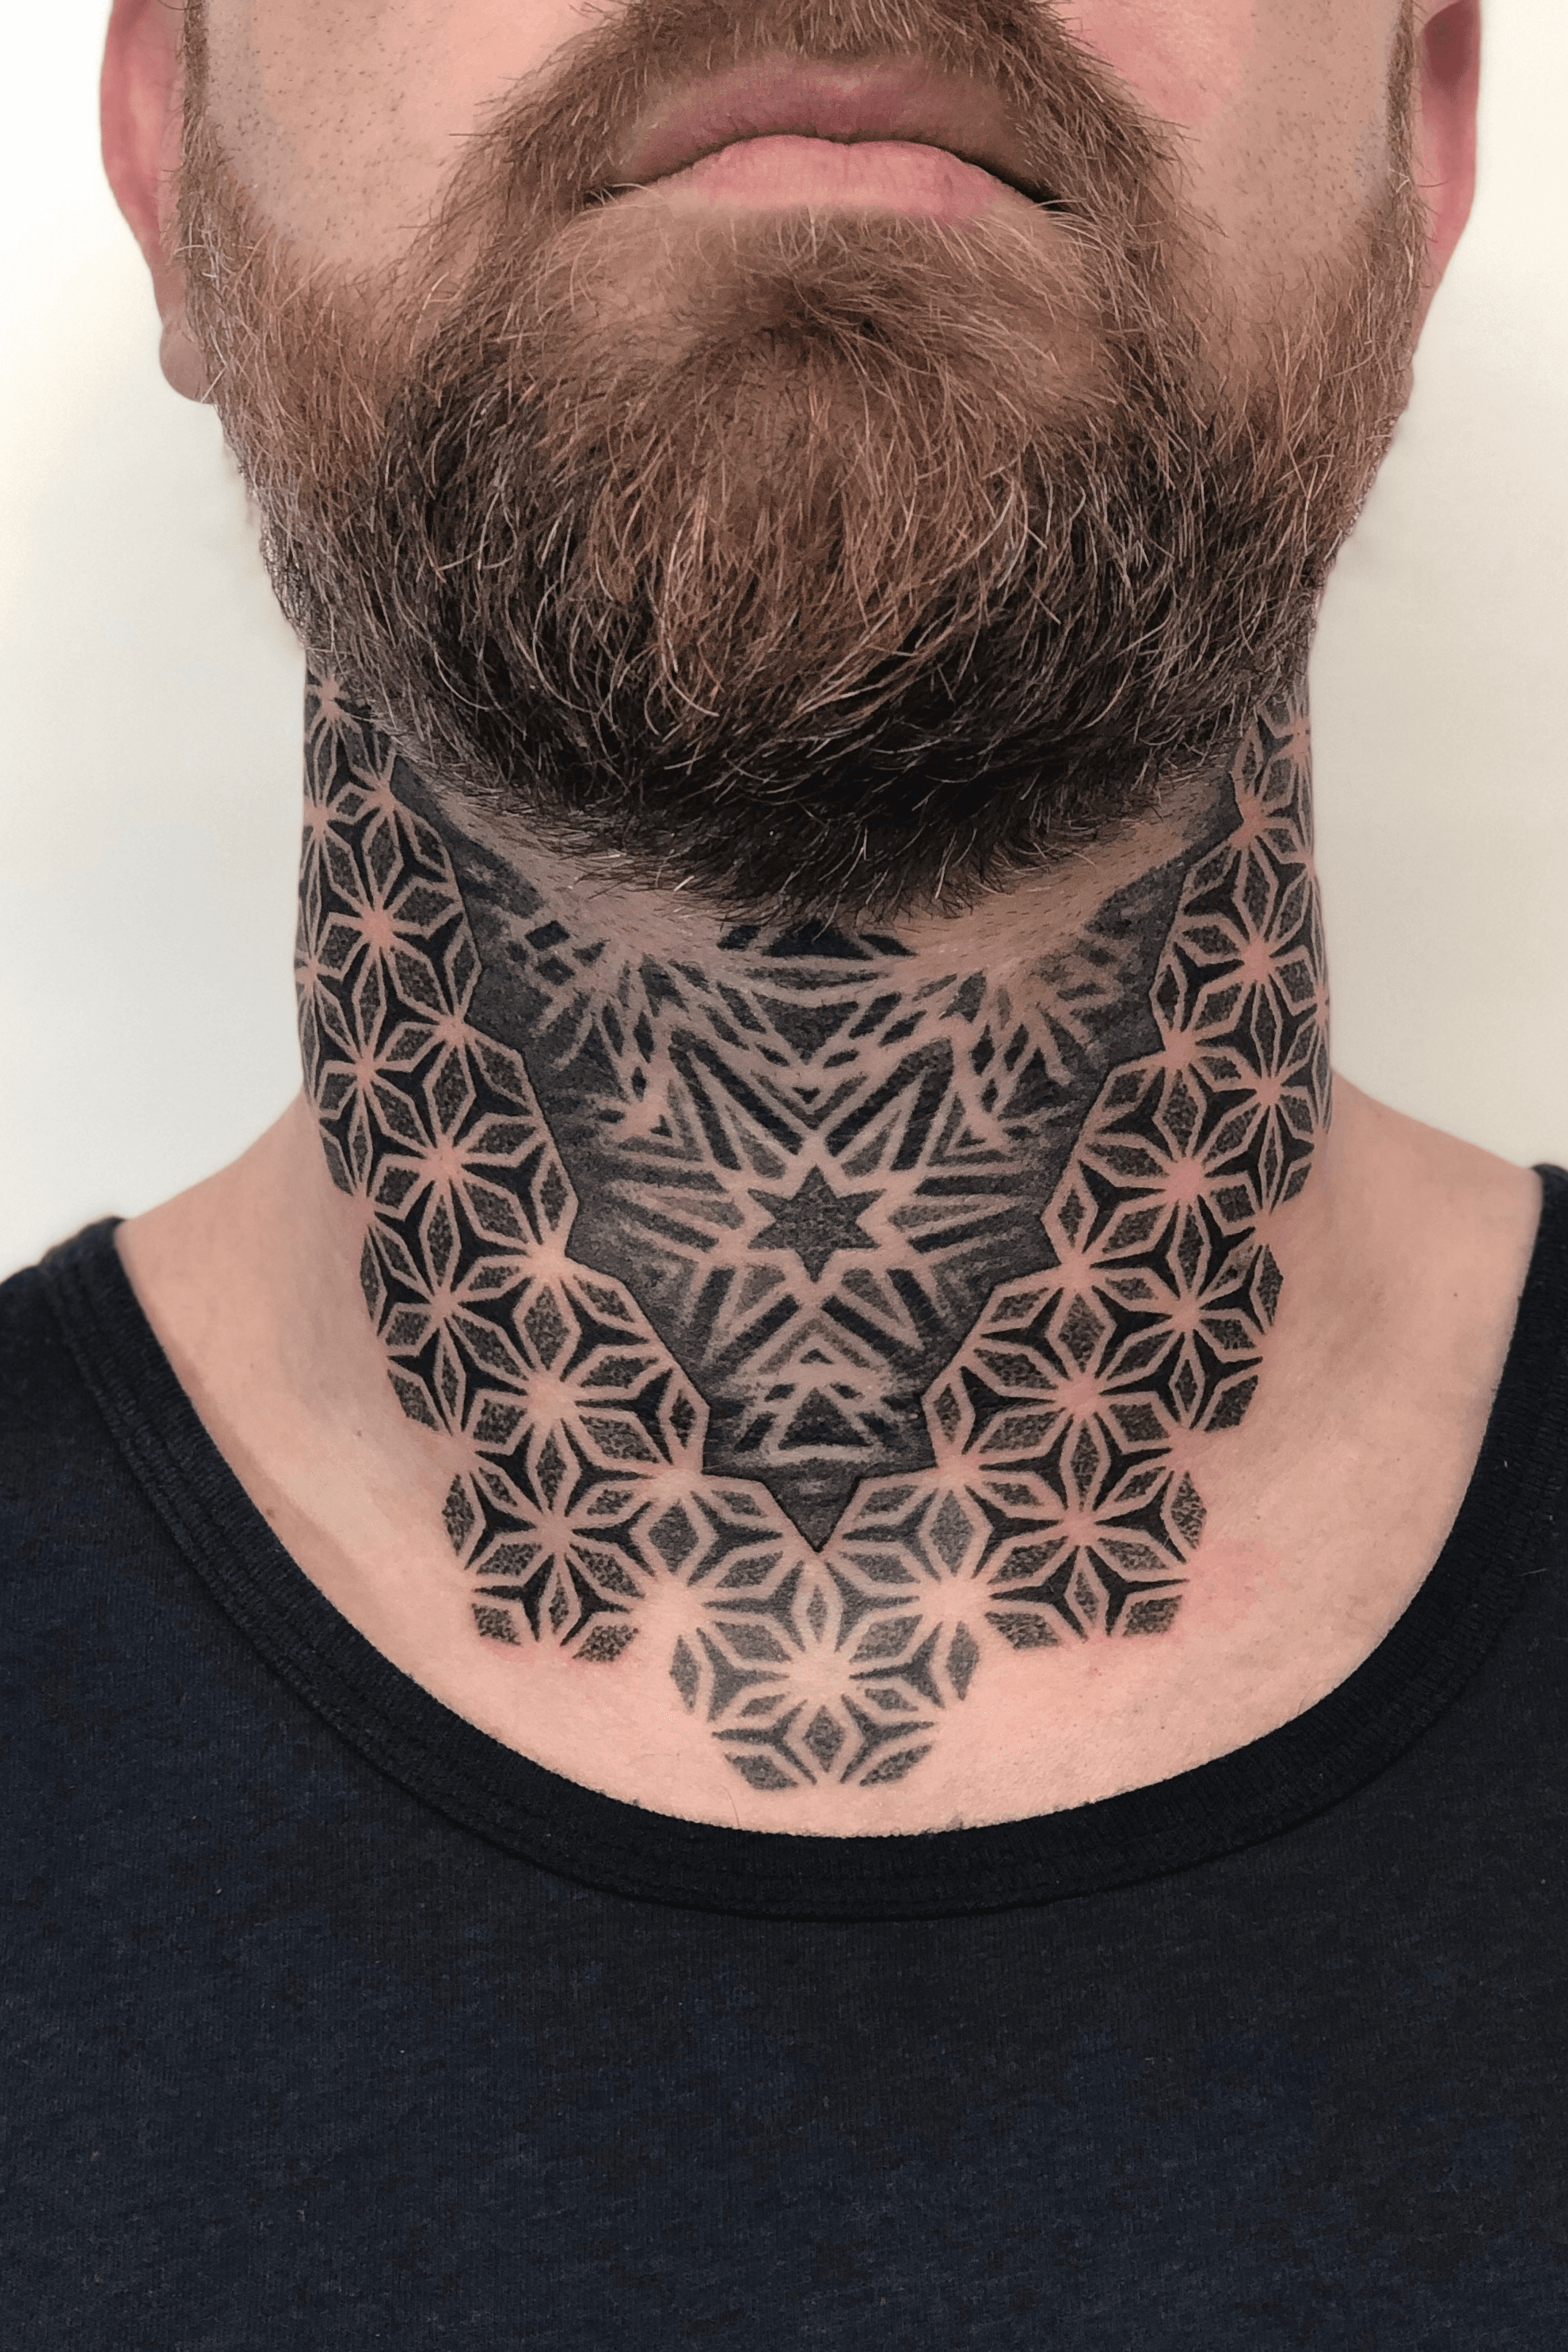 Blackwork  Abstract  Texture Tattooing on Instagram Decorative  botanical neck piece fully healed to compliment work by meliiseye and  mattsager Swipe to see fresh video More to come on